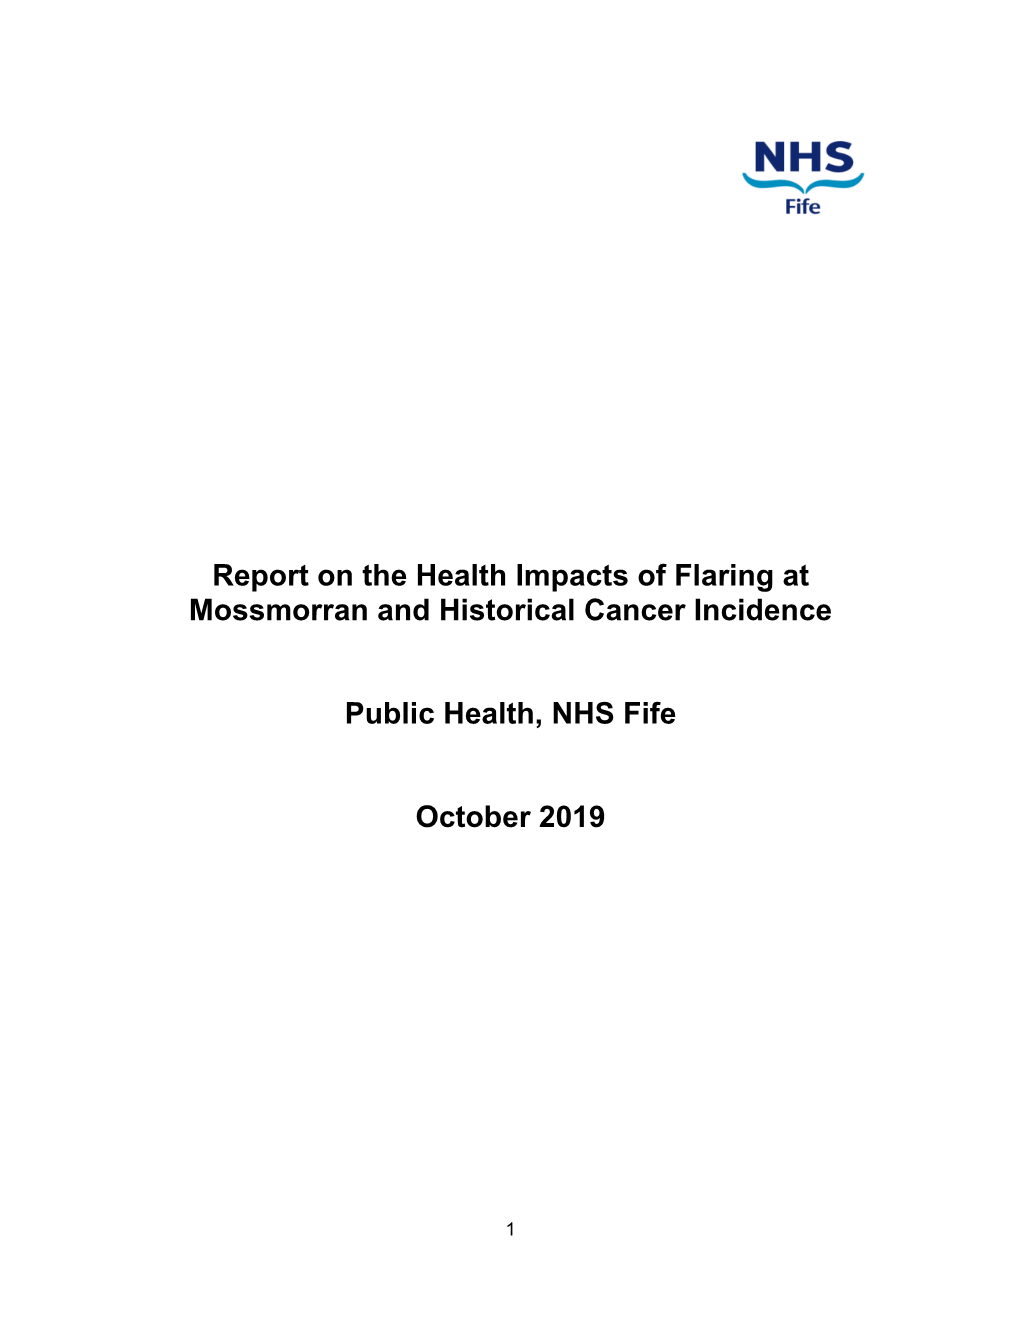 Report on the Health Impacts of Flaring at Mossmorran and Historical Cancer Incidence